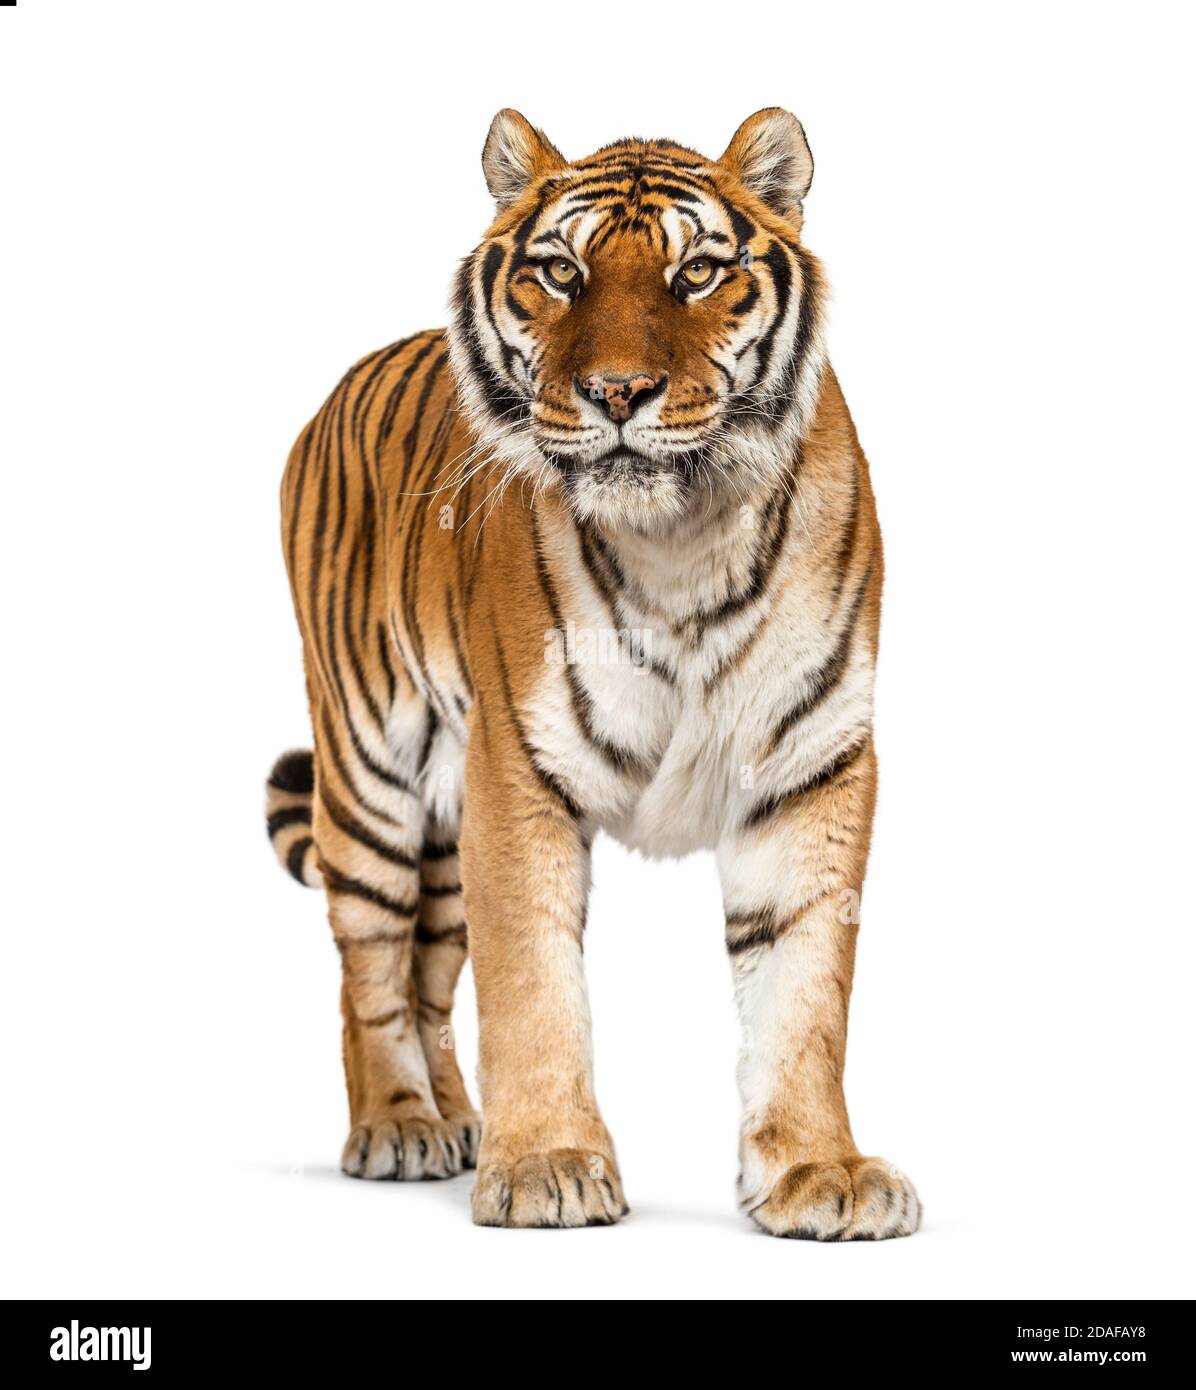 Tiger standing up in front of a white background Stock Photo